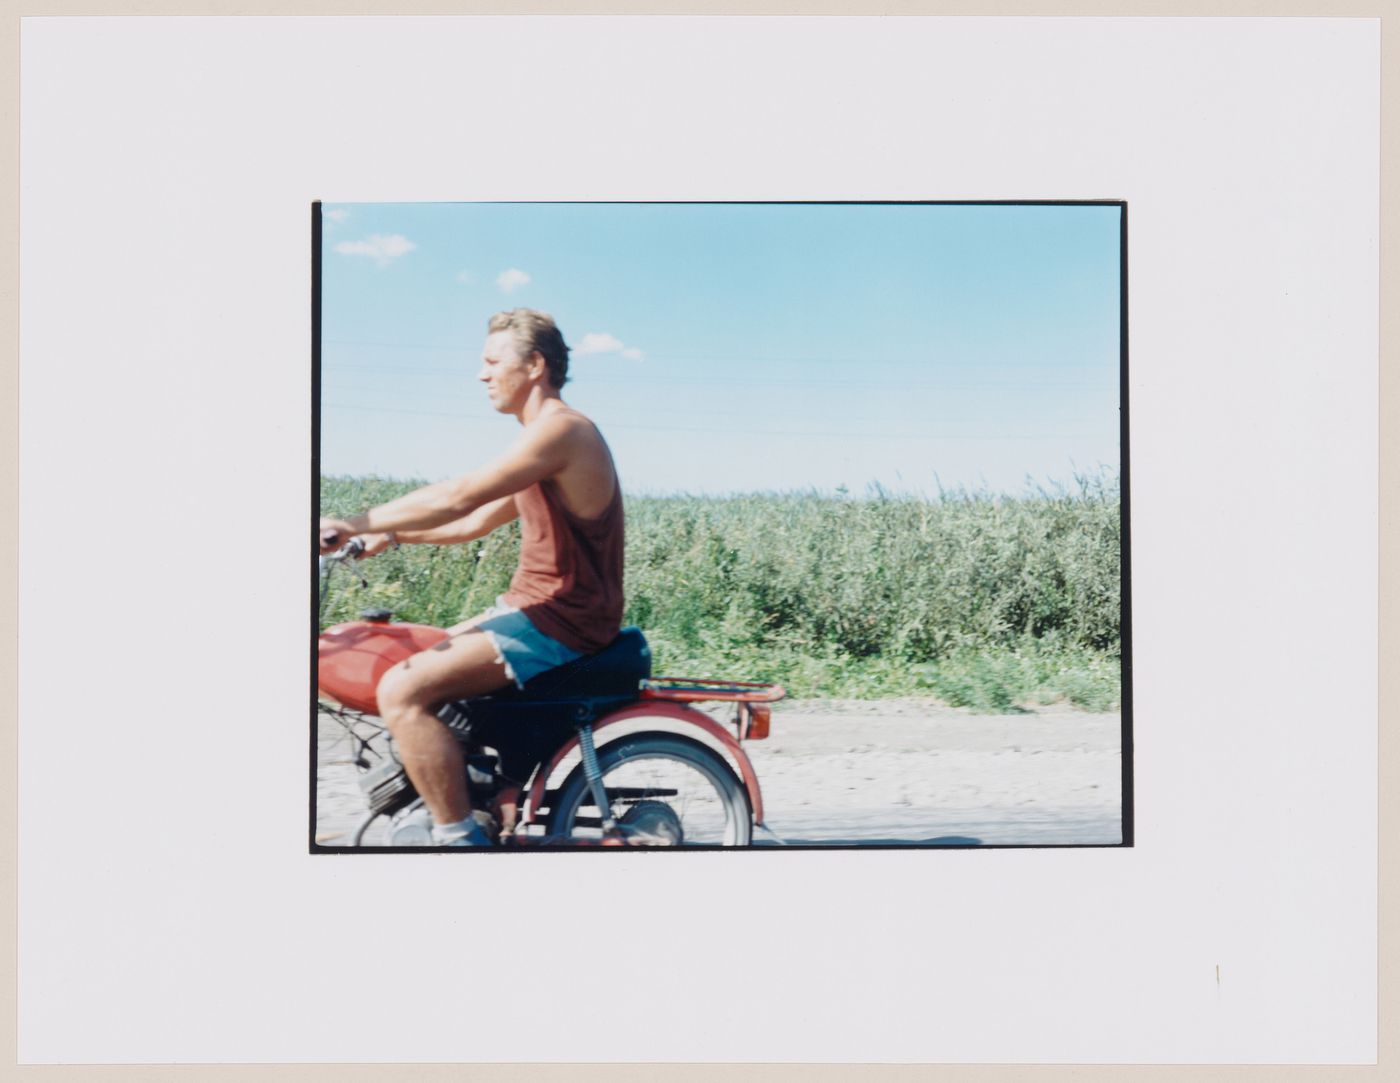 Portrait of a man riding a motorcycle and cropland, Mamonovo, Kaliningradskaia oblast', Russia (from the series "In between cities")